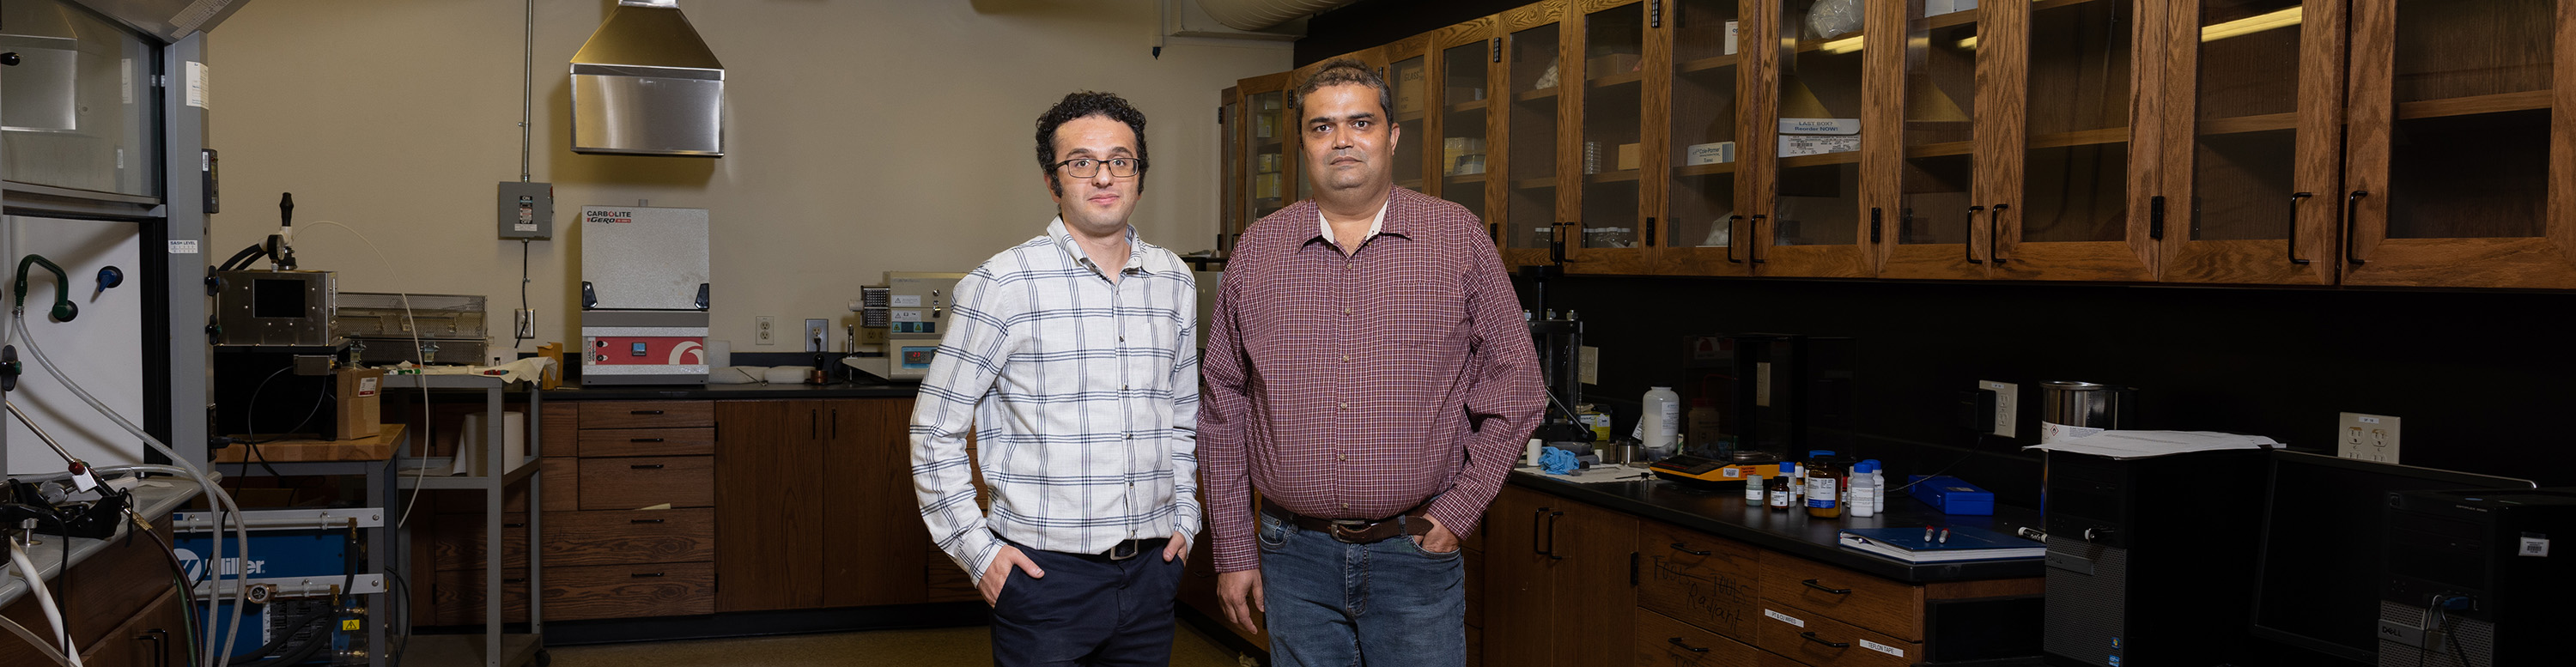 KSU physics professors earn grants to boost condensed matter physics research